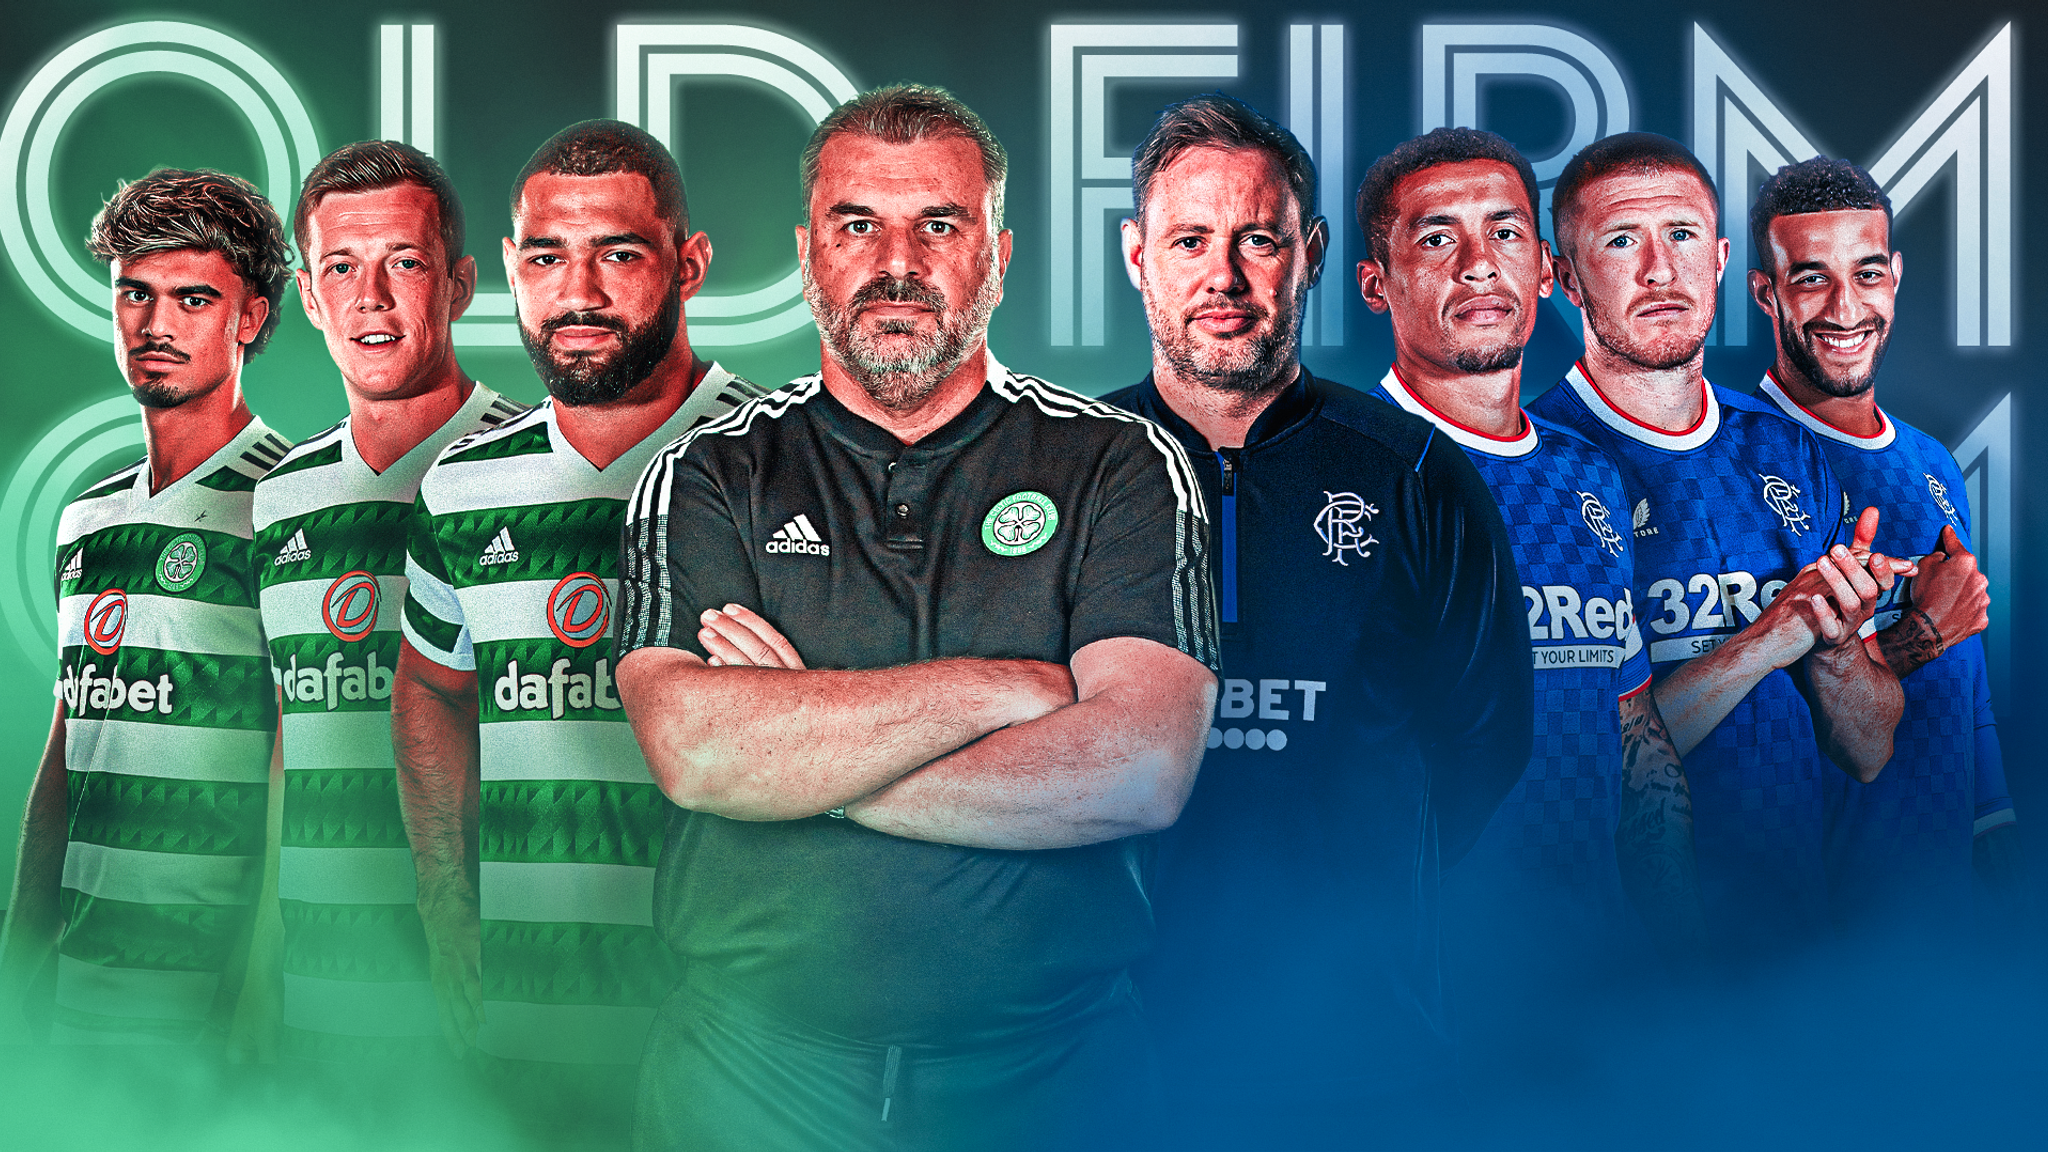 Who has scored most goals ever in Old Firm games and did they play for  Rangers or Celtic?